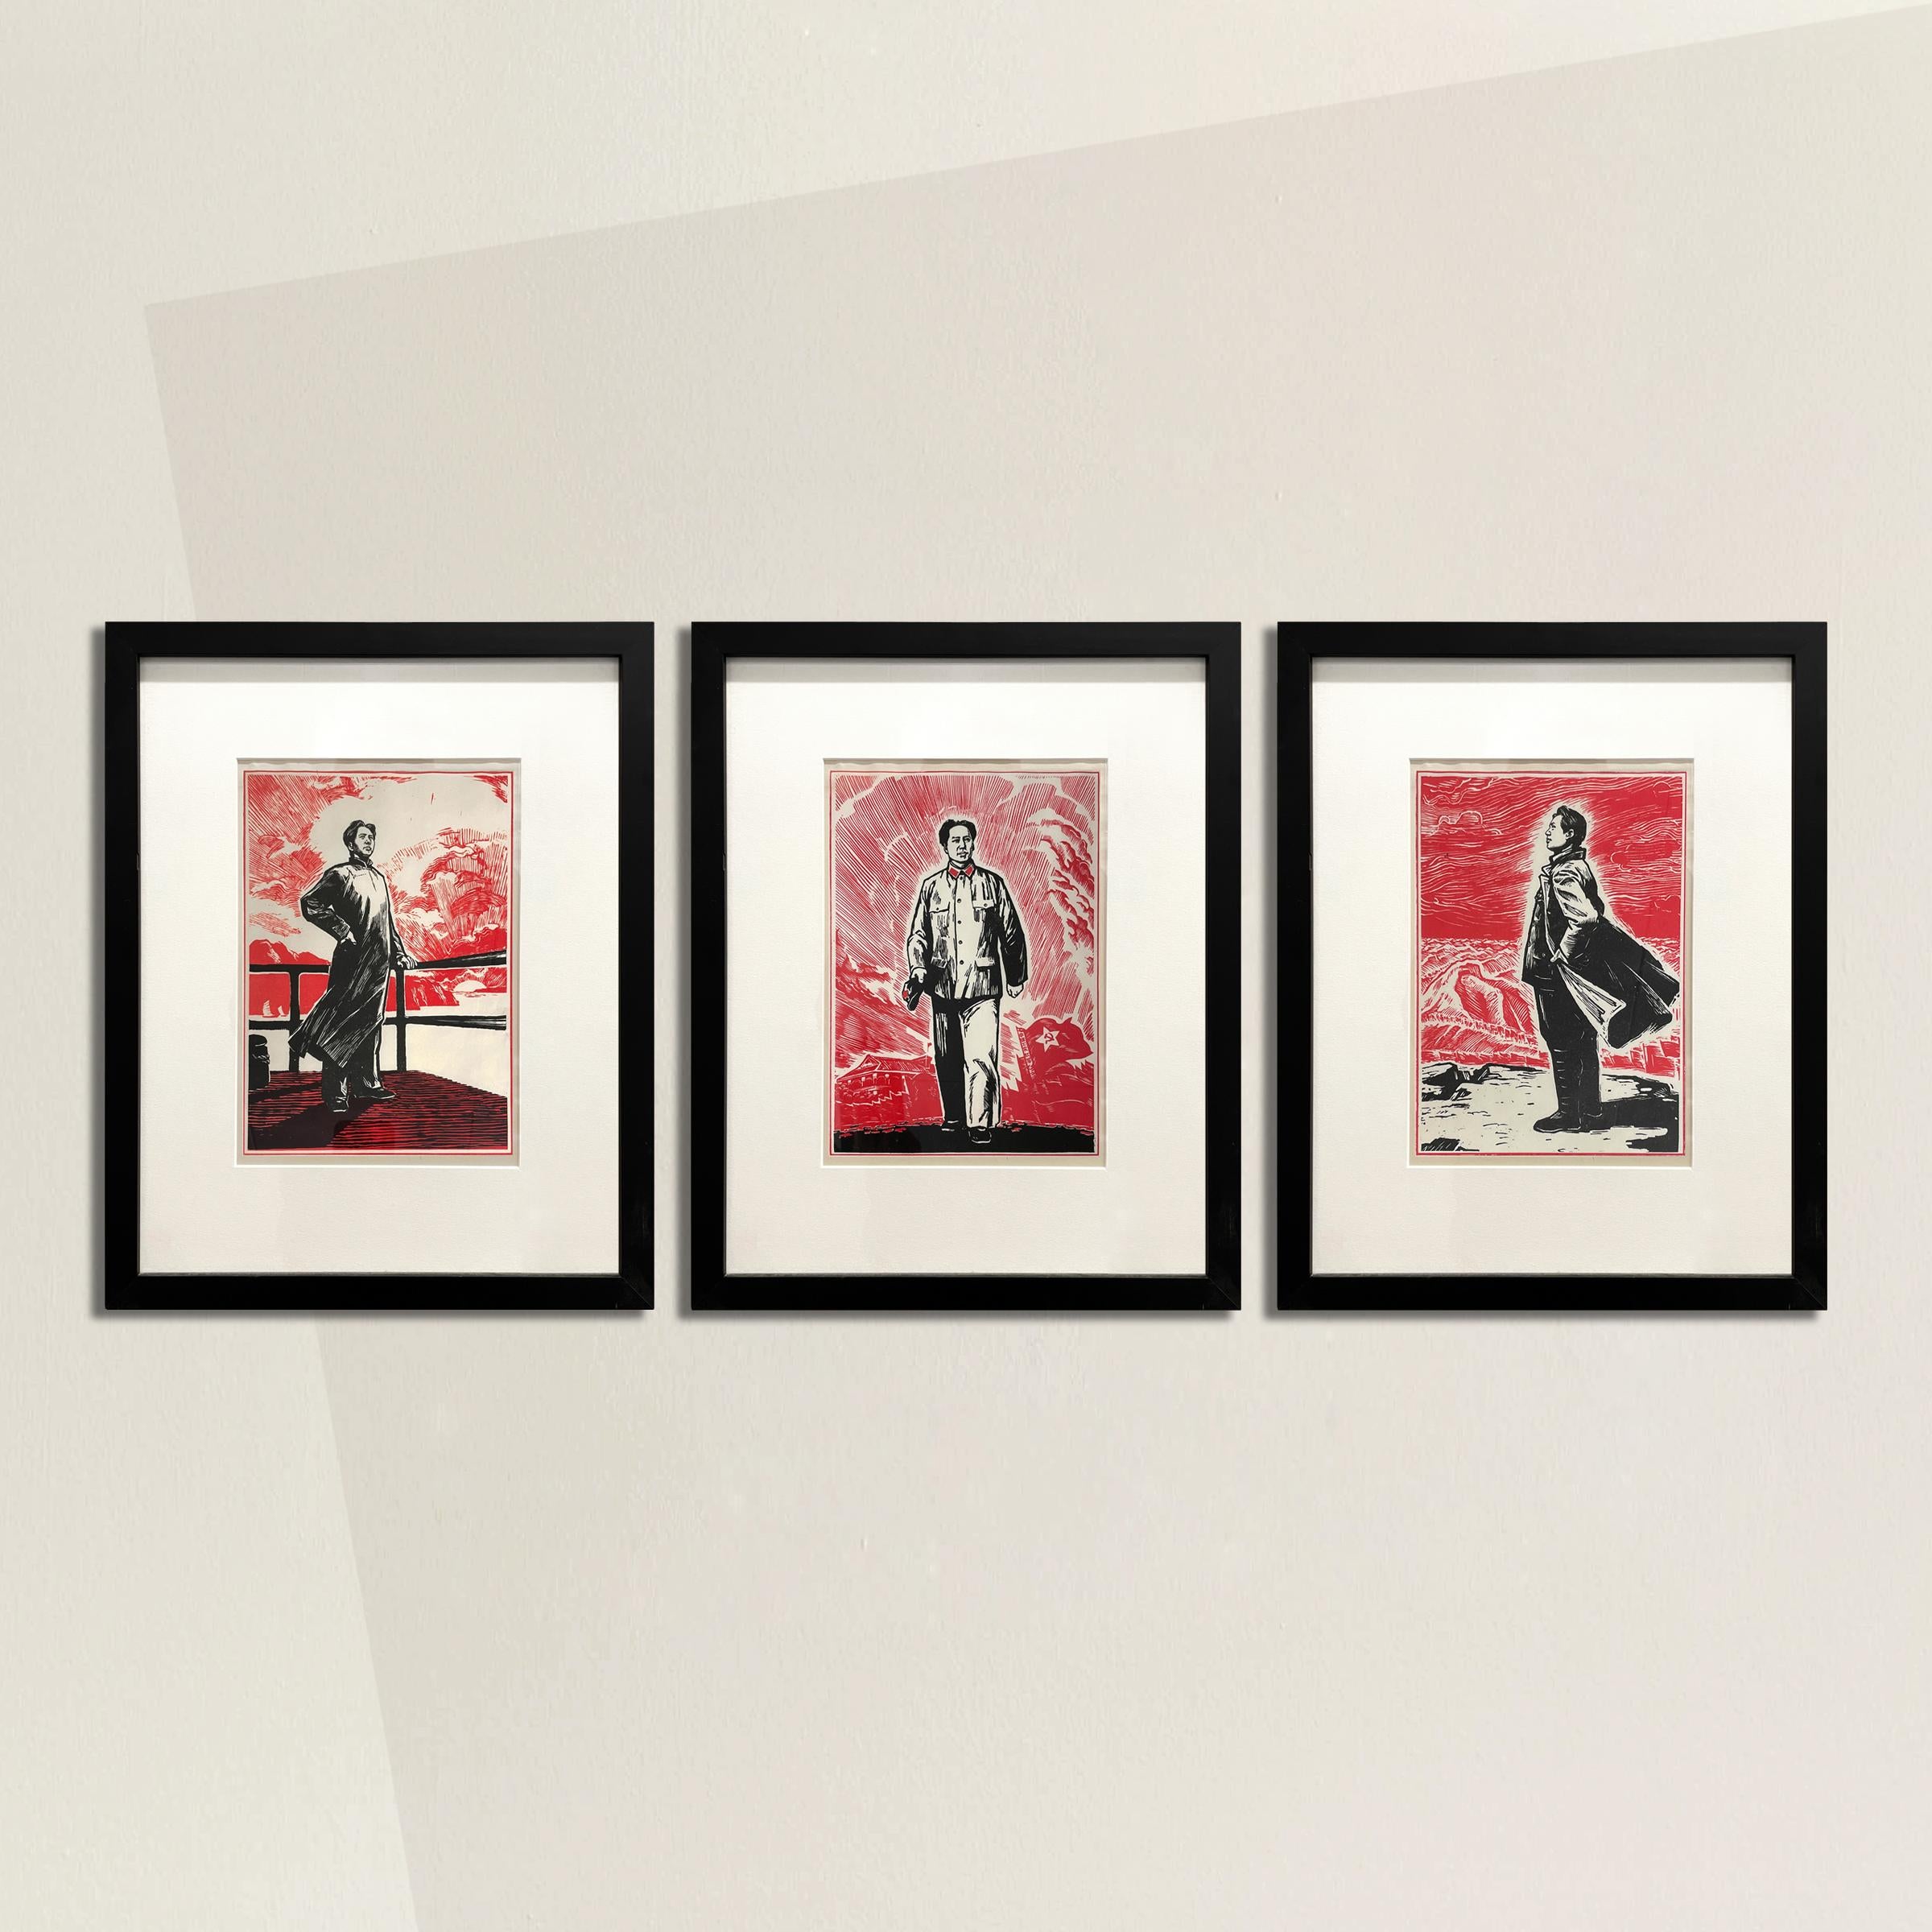 A striking set of three framed vintage Chinese woodblock prints from a book printed in the 1960s, each depicting a different phase of Chairman Mao Zedong's life. Propaganda ephemera becomes Pop Art portraiture à la Andy Warhol when presented out of